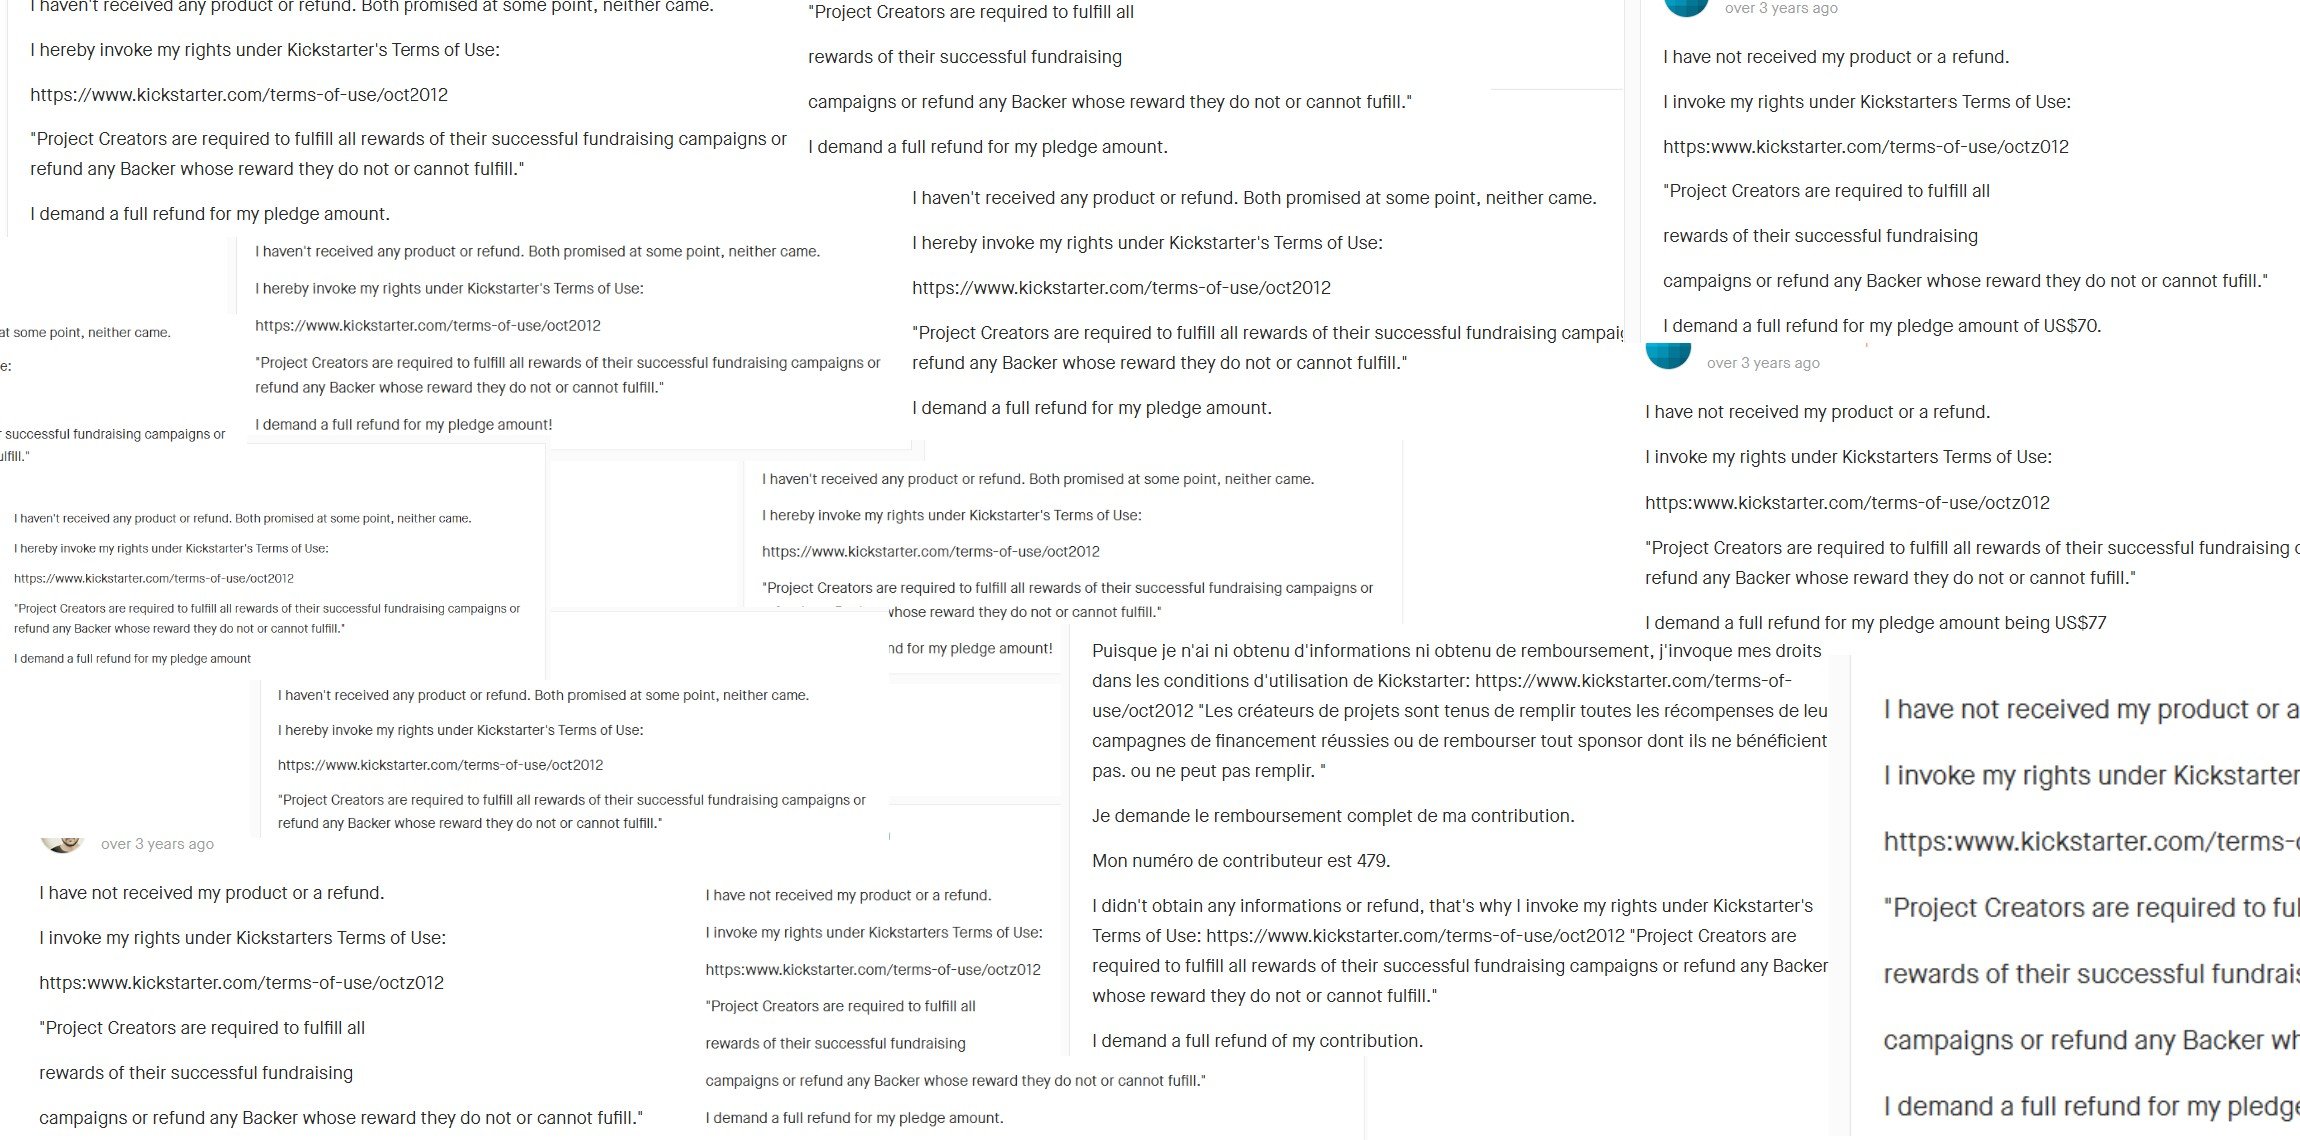 Screenshot of various comments reading "I invoke my rights under Kickstarter's Terms of Use:  https://www.kickstarter.com/terms-of-use/oct2012  "Project Creators are required to fulfill all rewards of their successful fundraising campaigns or refund